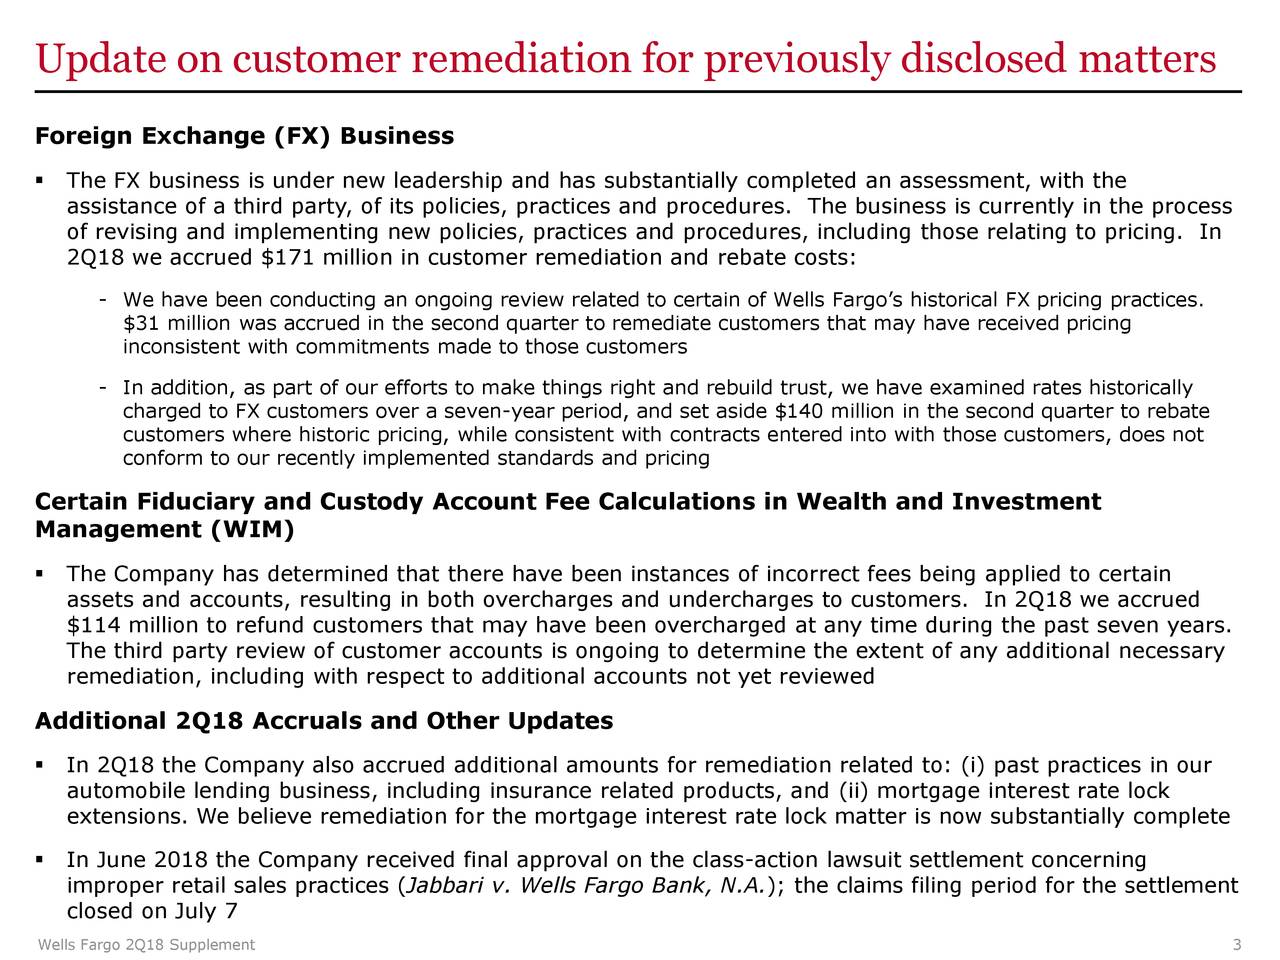 Update on customer remediation for previously disclosed matters